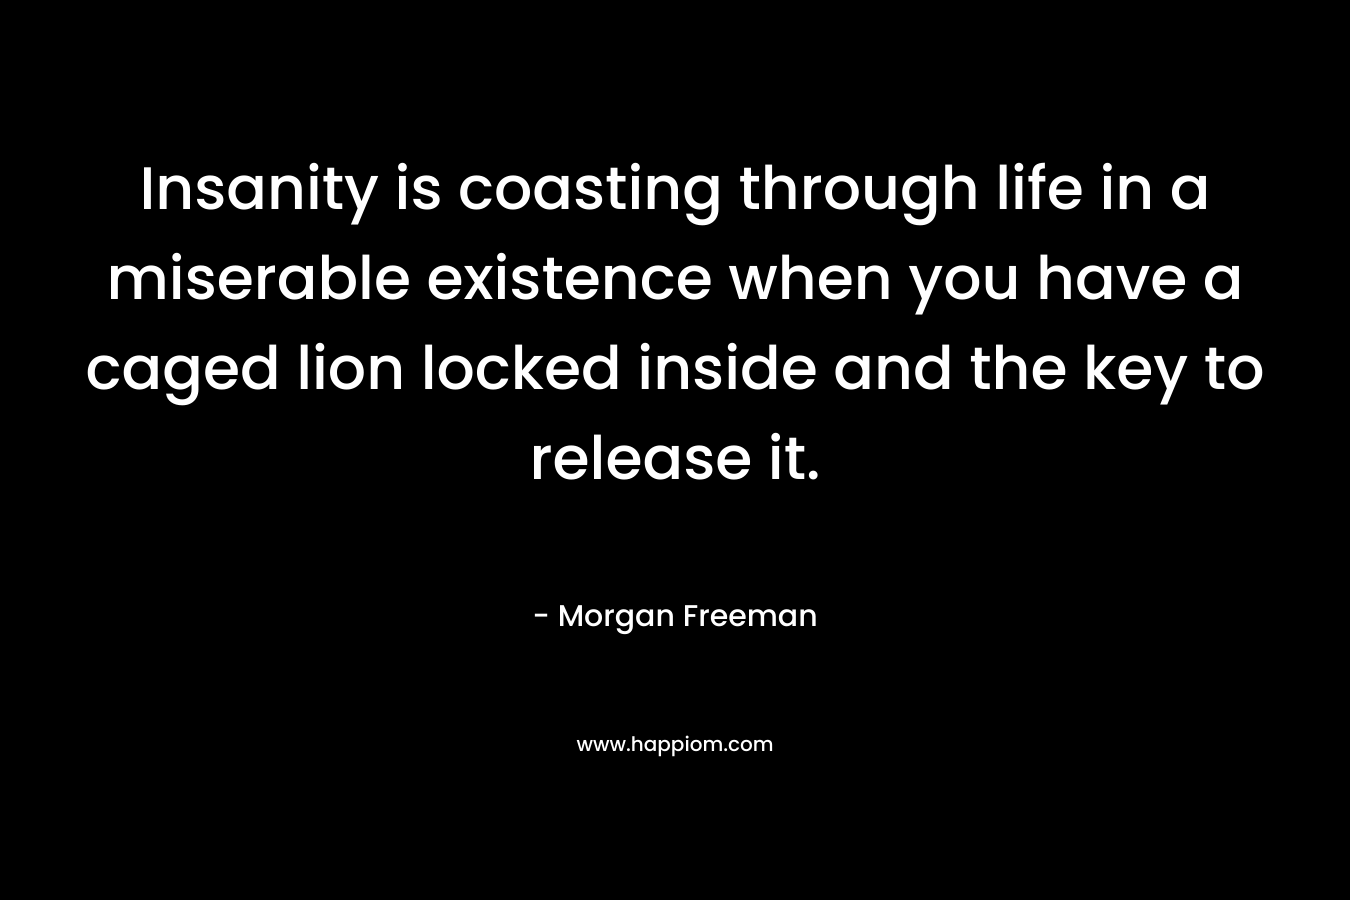 Insanity is coasting through life in a miserable existence when you have a caged lion locked inside and the key to release it. – Morgan Freeman